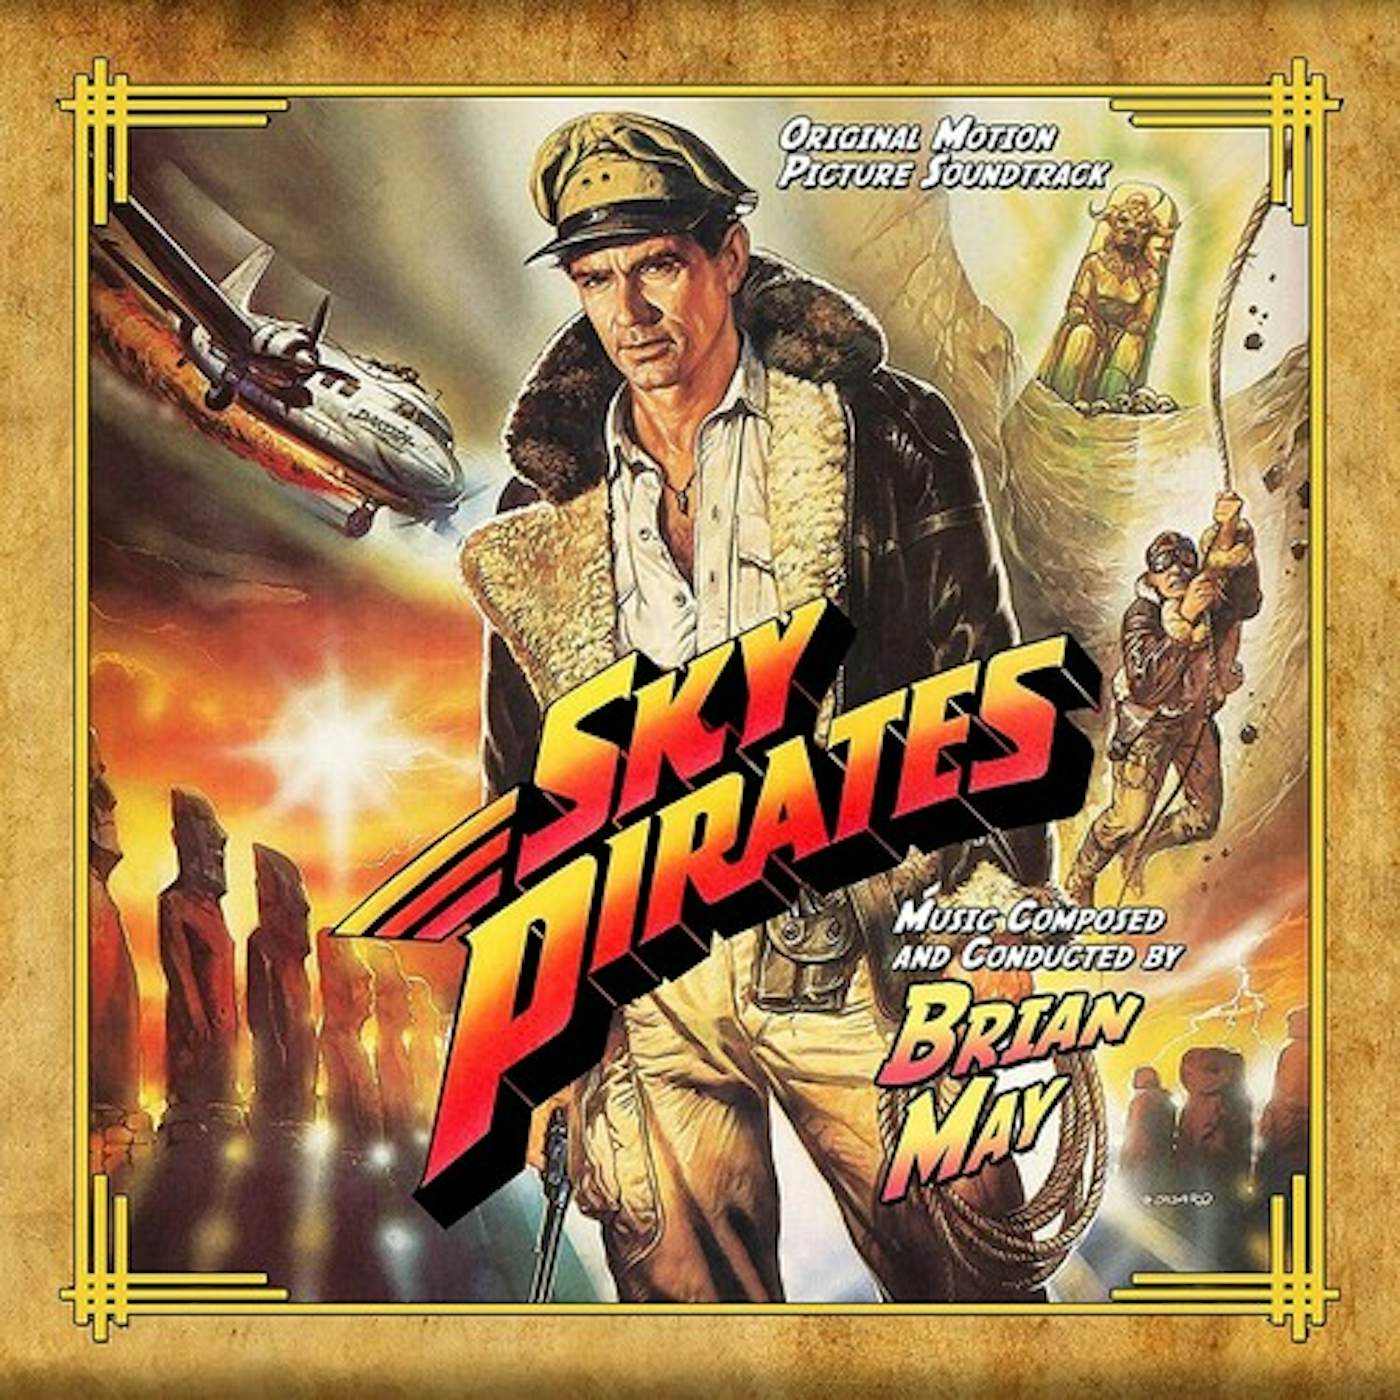 Brian May SKY PIRATES (ORIGINAL MOTION PICTURE SOUNDTRACK) CD